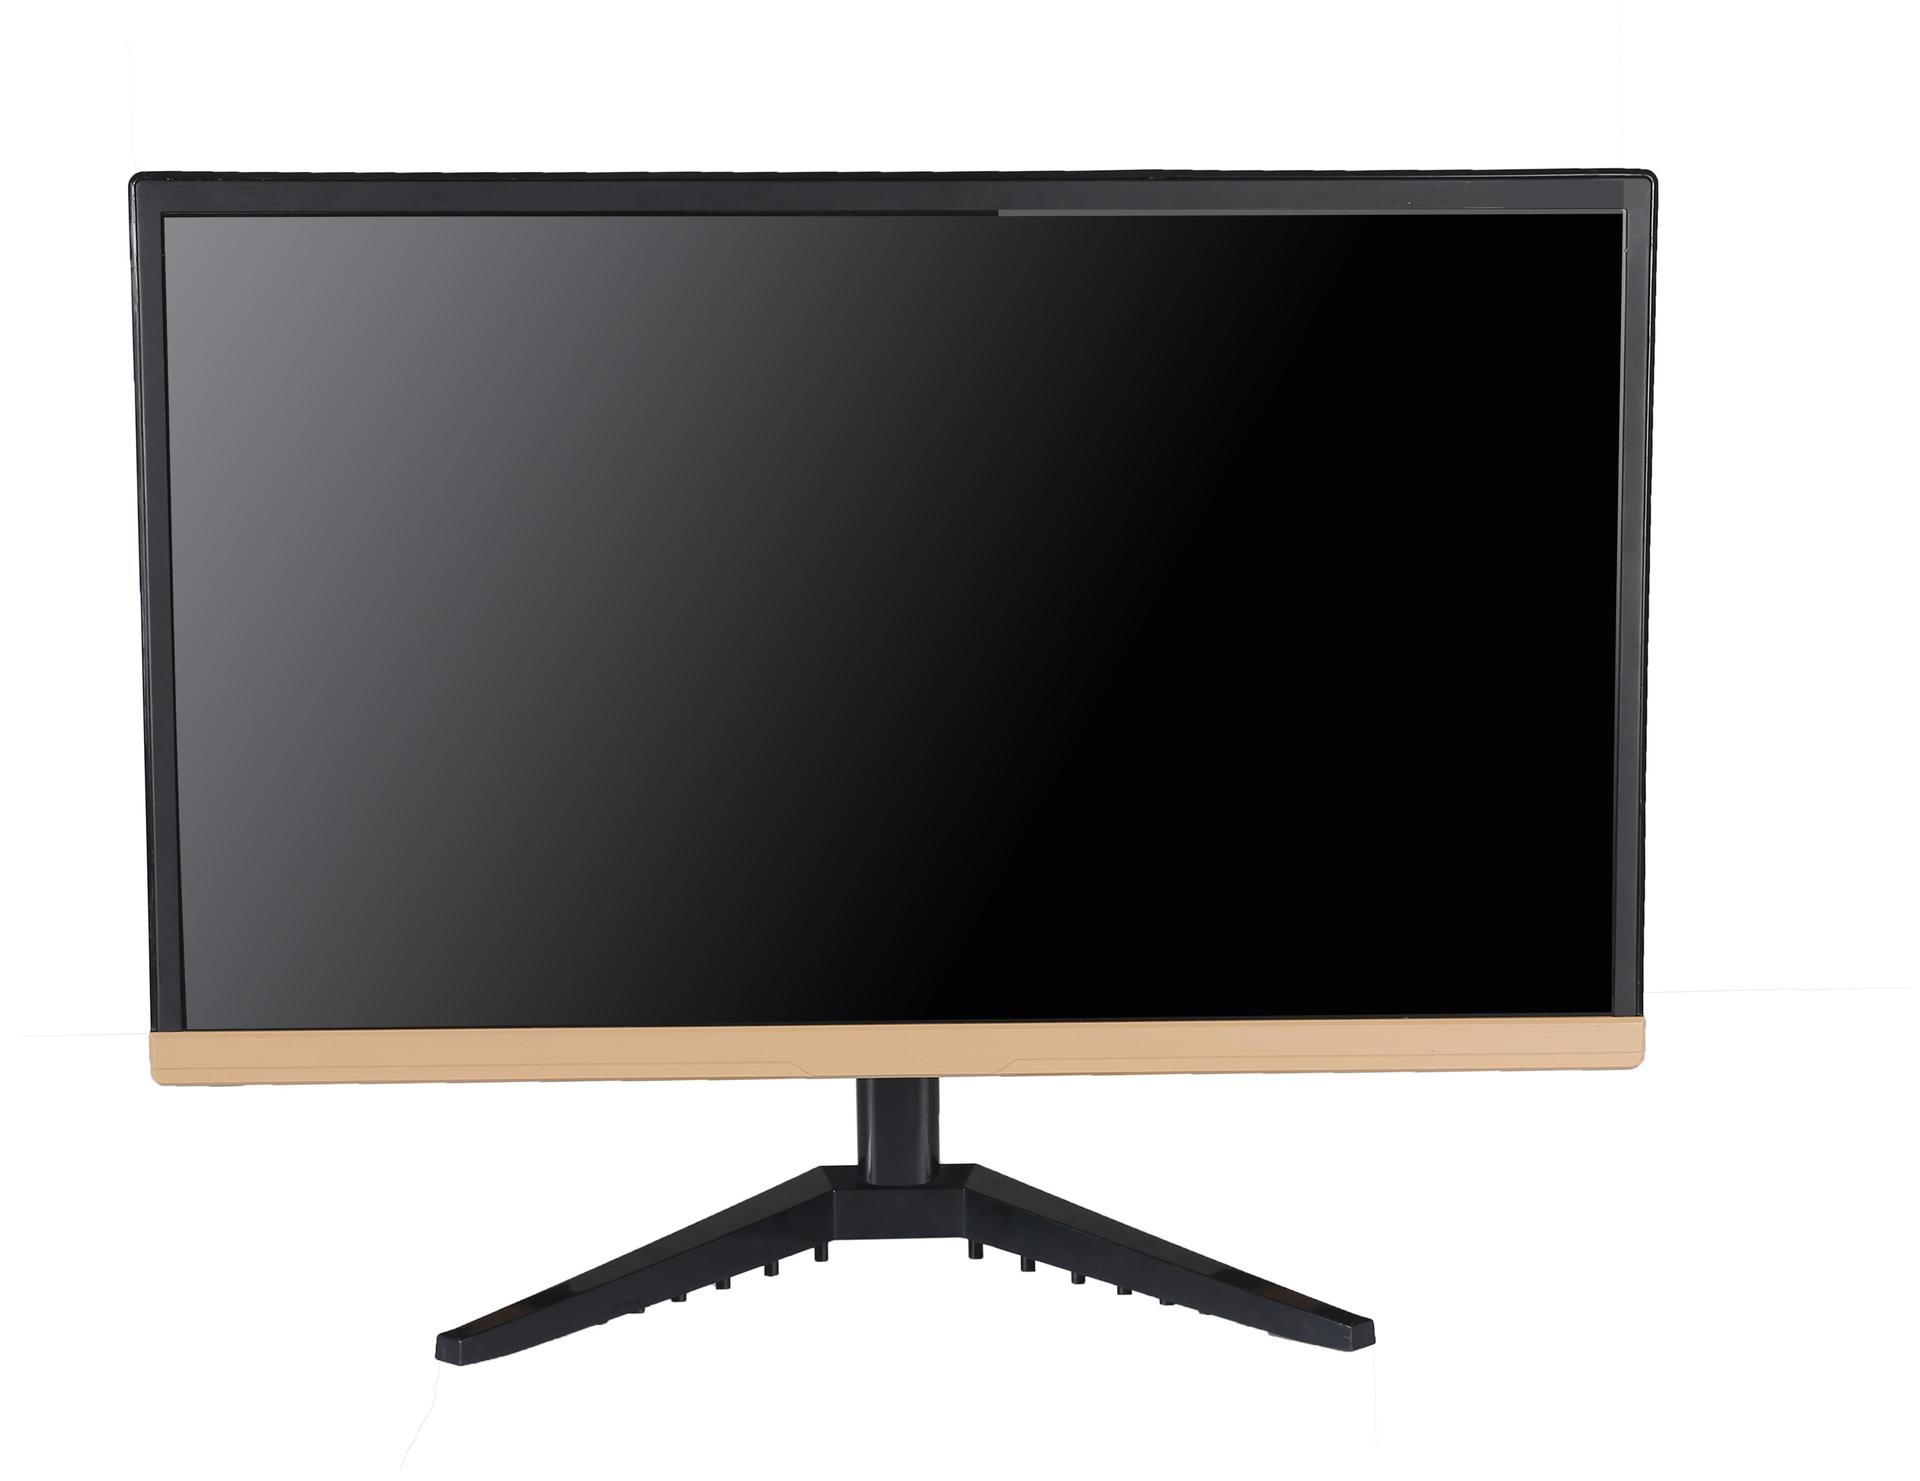 curve screen 21.5 inch led monitor full hd for lcd tv screen